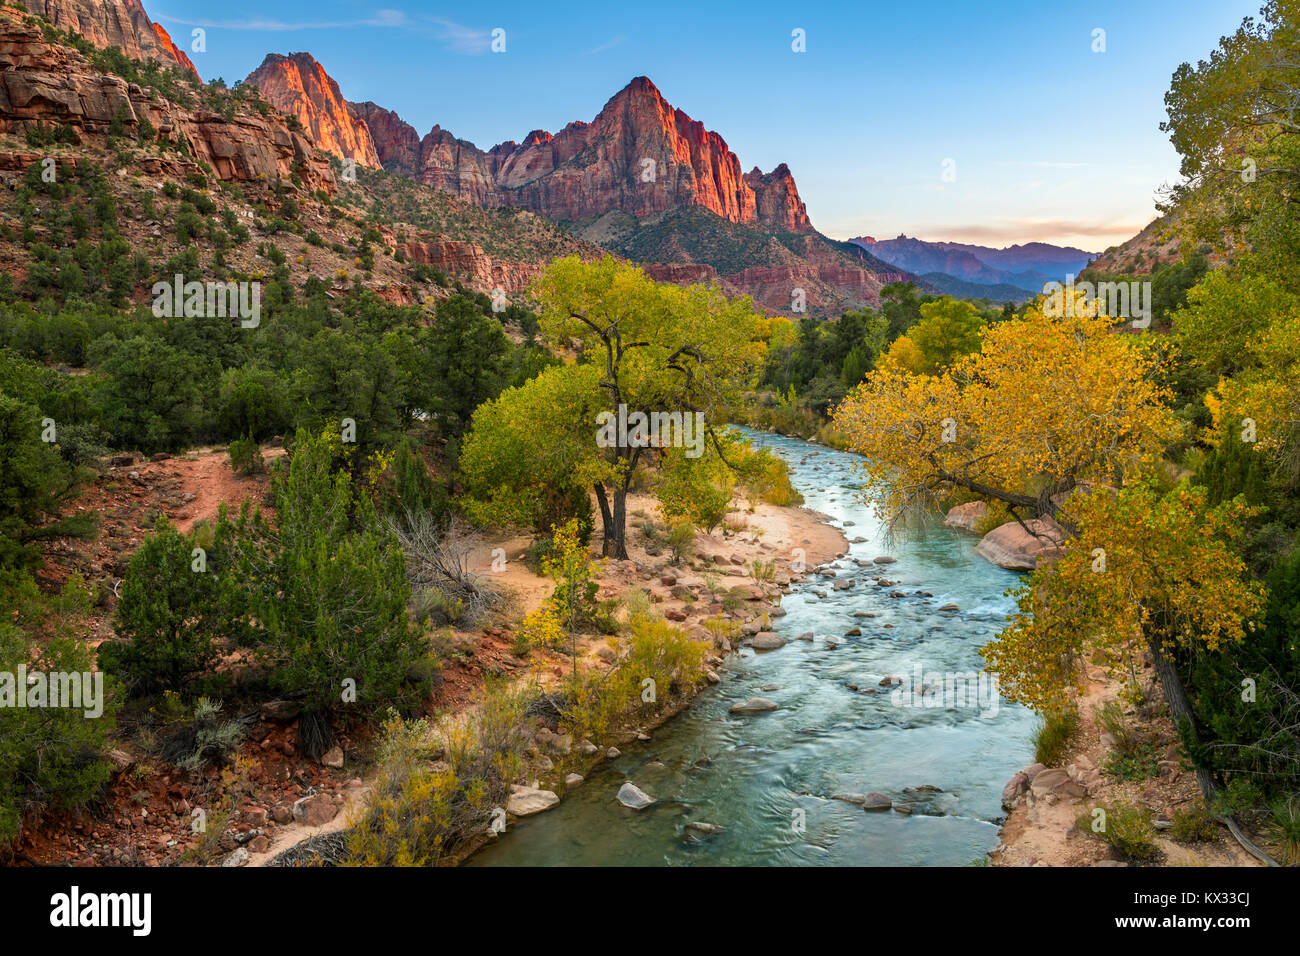 The most famous and iconic landmark in Zion National Park in Utah. Stock Photo